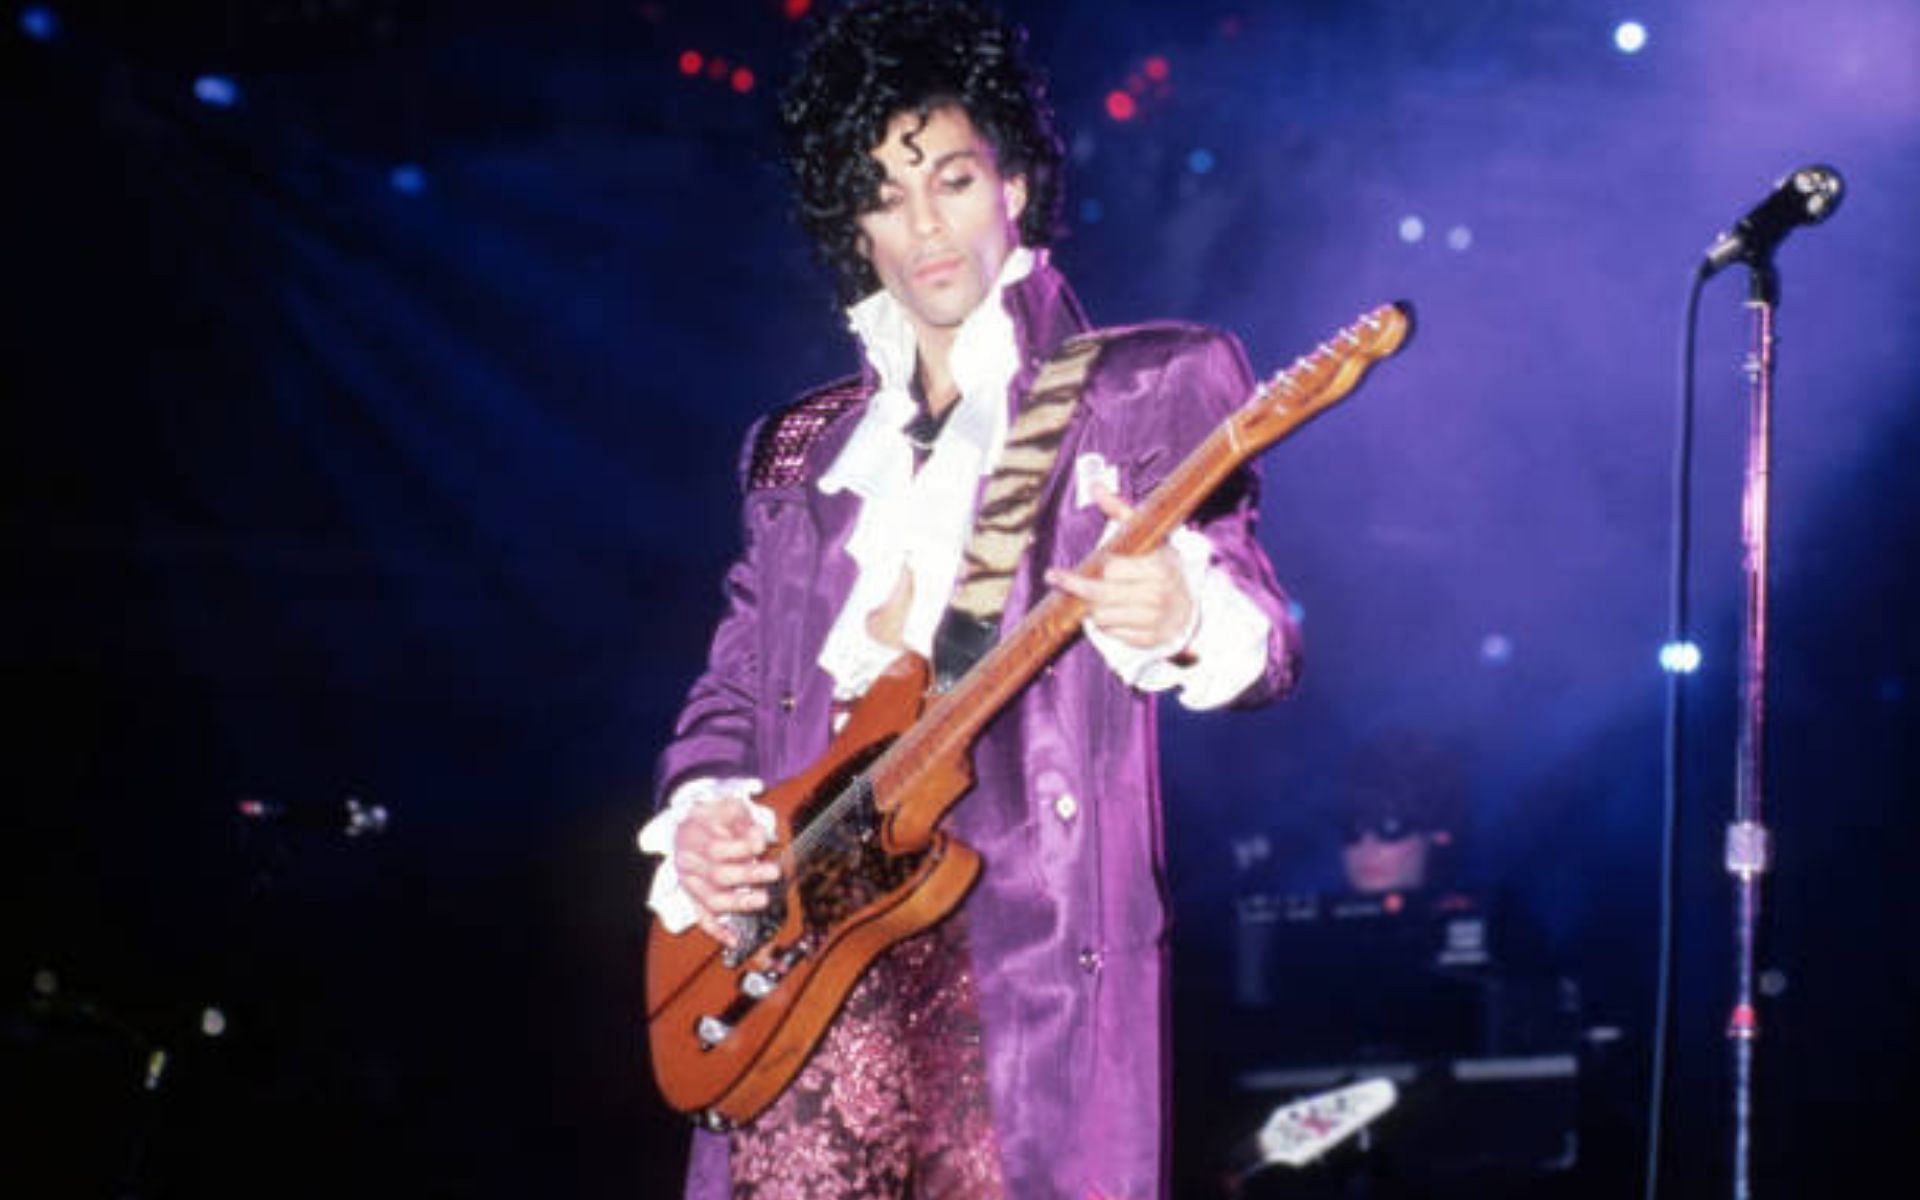 Rock and Roll Hall of Famer Prince